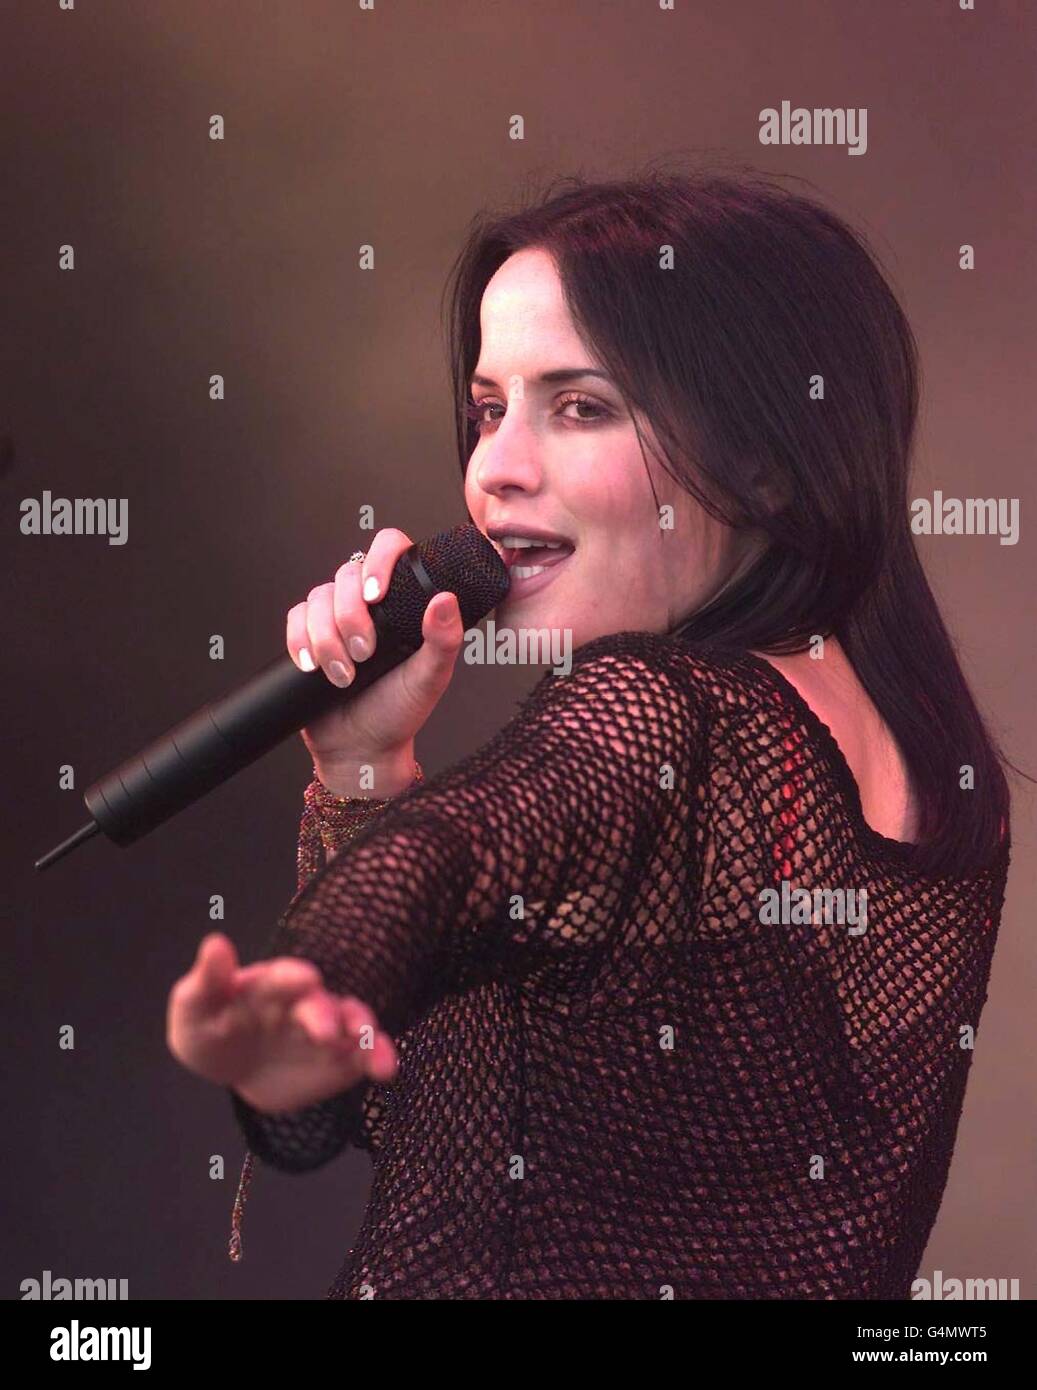 Andrea Corr from the Irish pop group 'the Corrs', performs on stage during the 1999 Glastonbury Festival. * Irish singer Ronan Keating and American chat show queen Oprah Winfrey are set to be the two top faces of the new millennium, according to research published. Corrs lead singer Andrea Corr and solo star Ricky Martin were joined in second place with basketball legend Michael Jordan, with US President Bill Clinton in third. The study was carried out by Edelman Public Relations Worldwide, with feedback coming from countries around the globe. Stock Photo